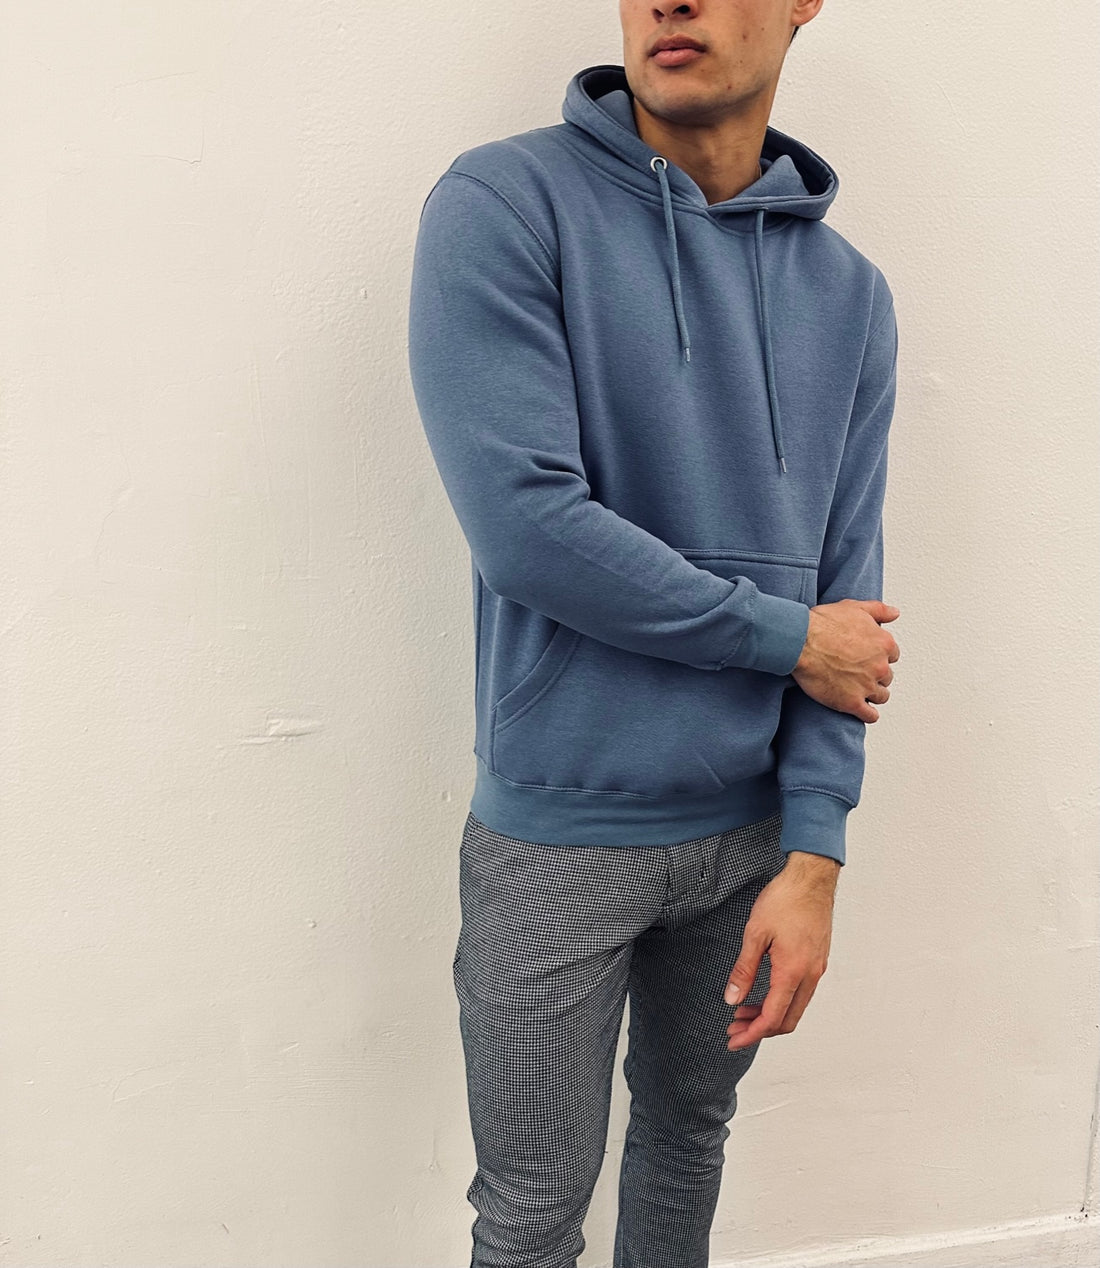 unique hoodies made of super soft timeless fashion tops